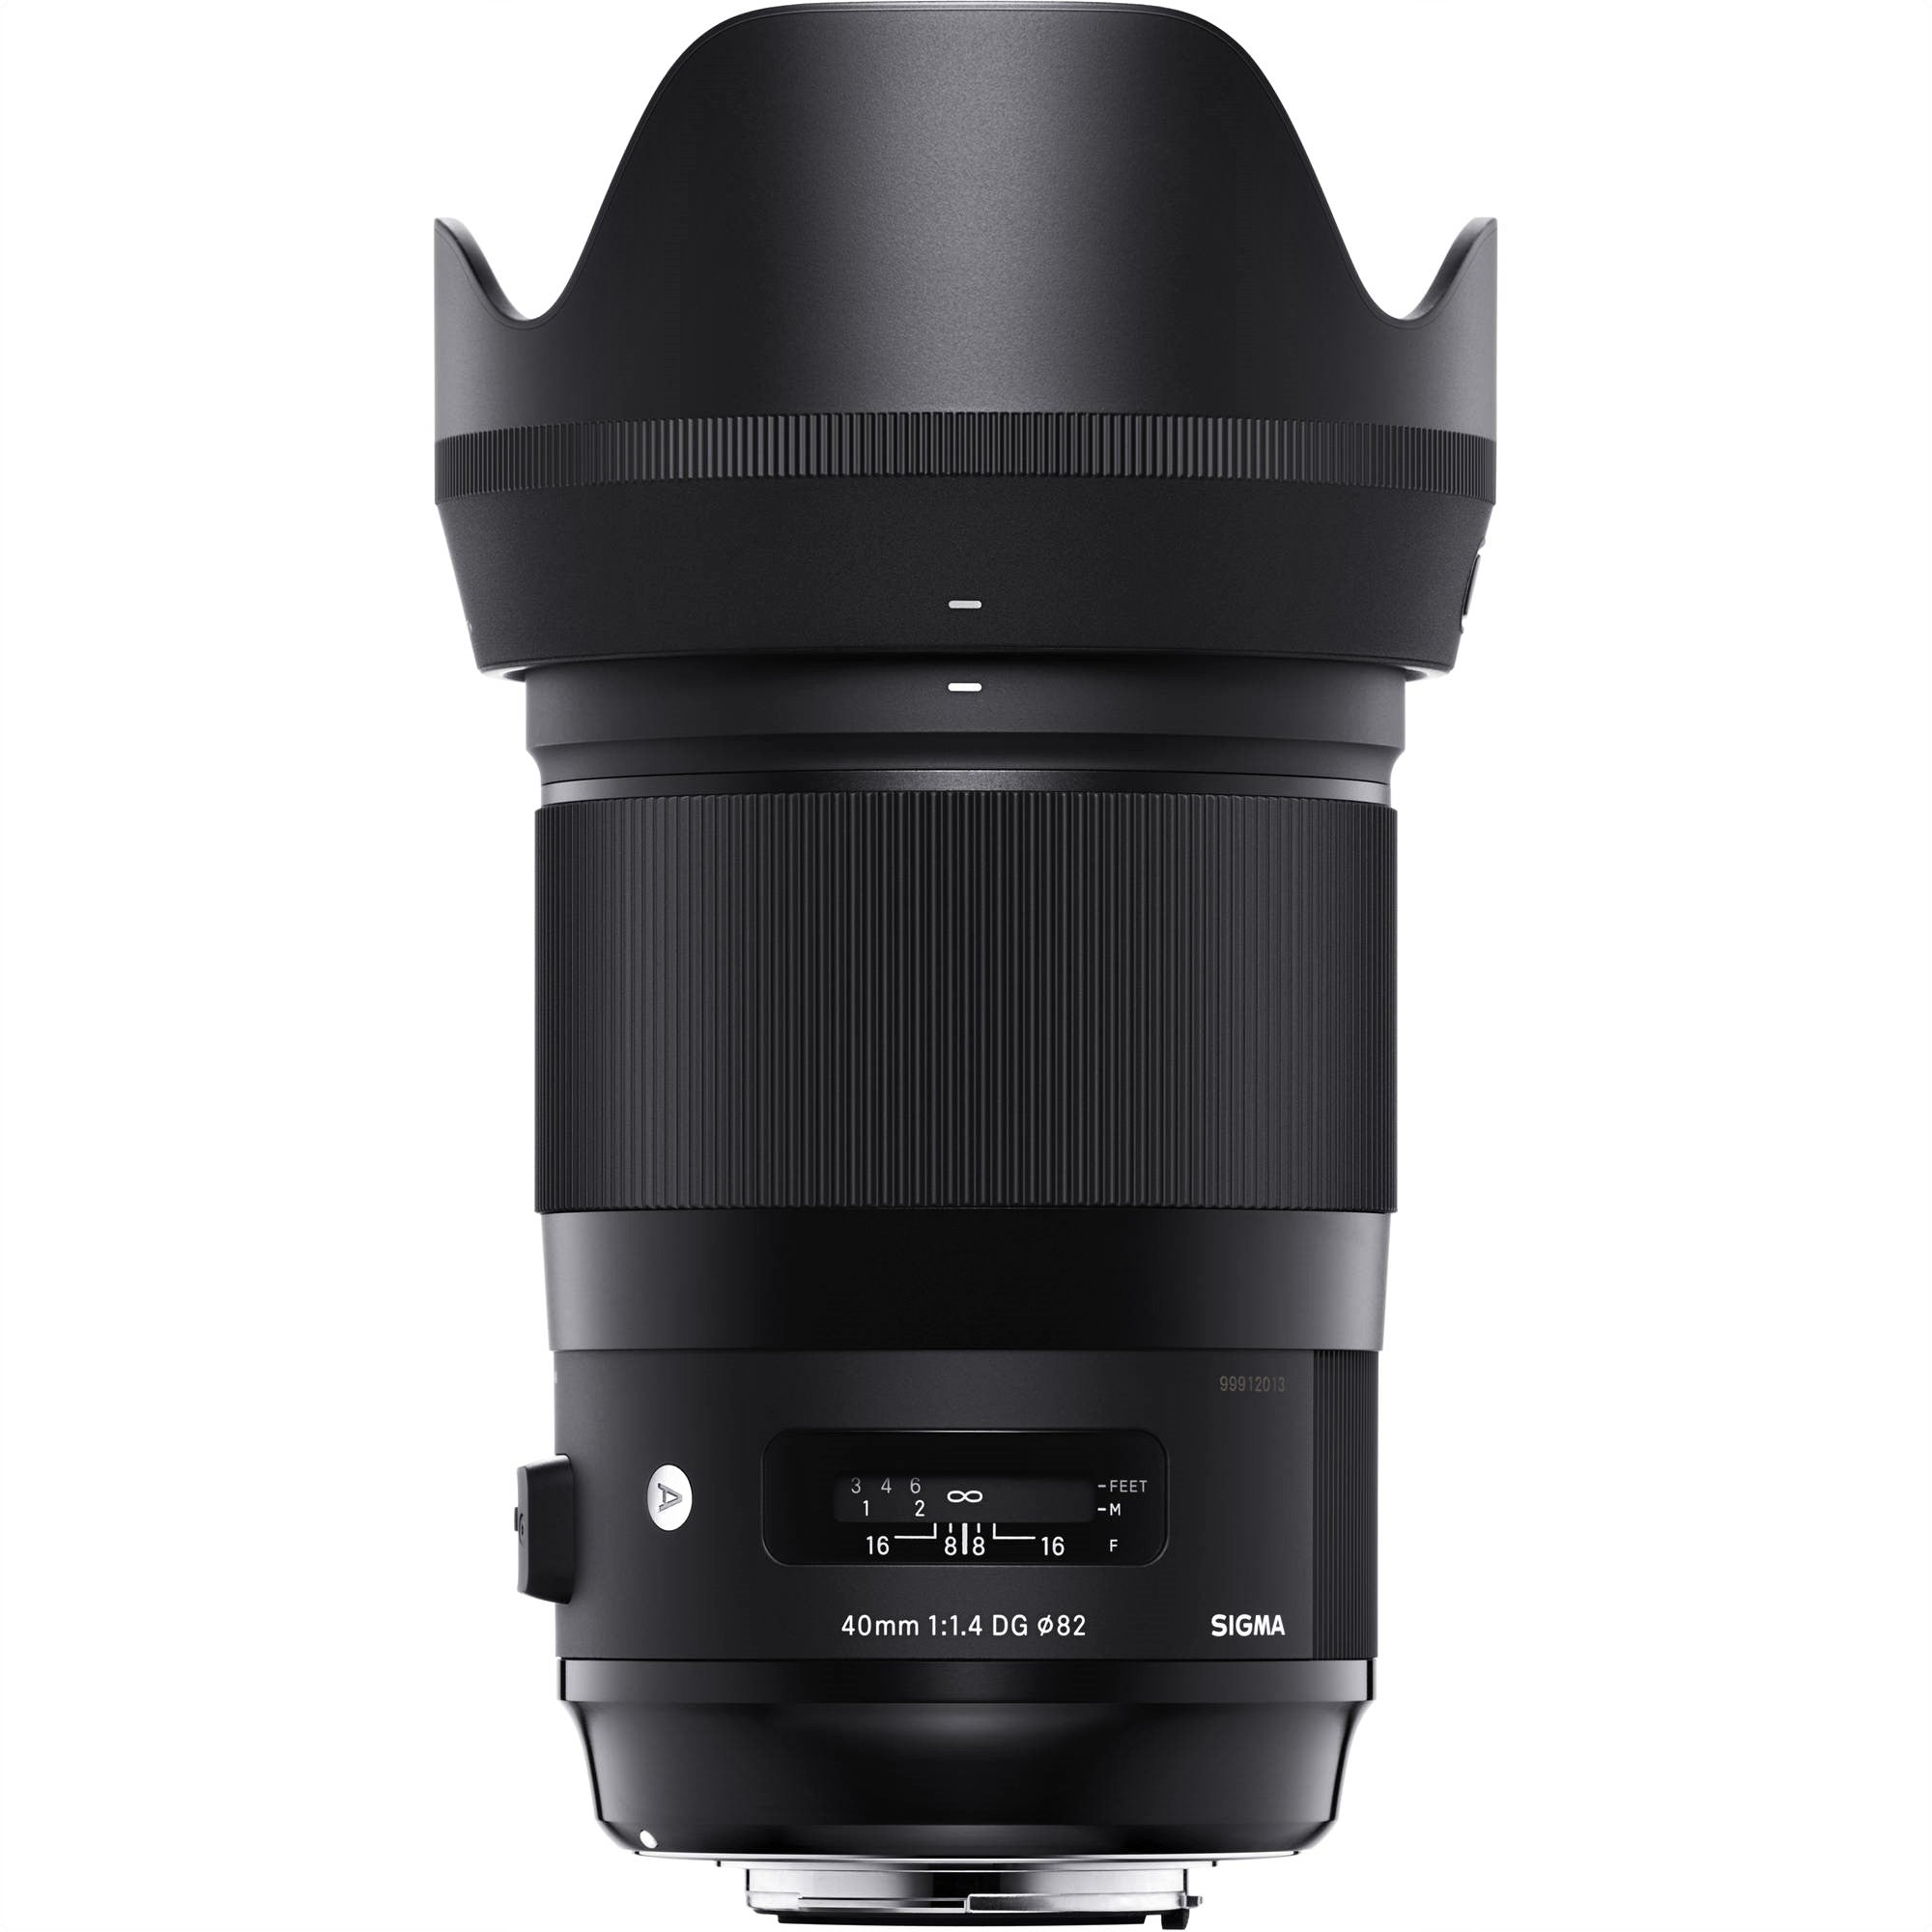 Sigma 40mm F1.4 DG HSM Art Lens for Nikon F with Attached Lens Hood on the Top